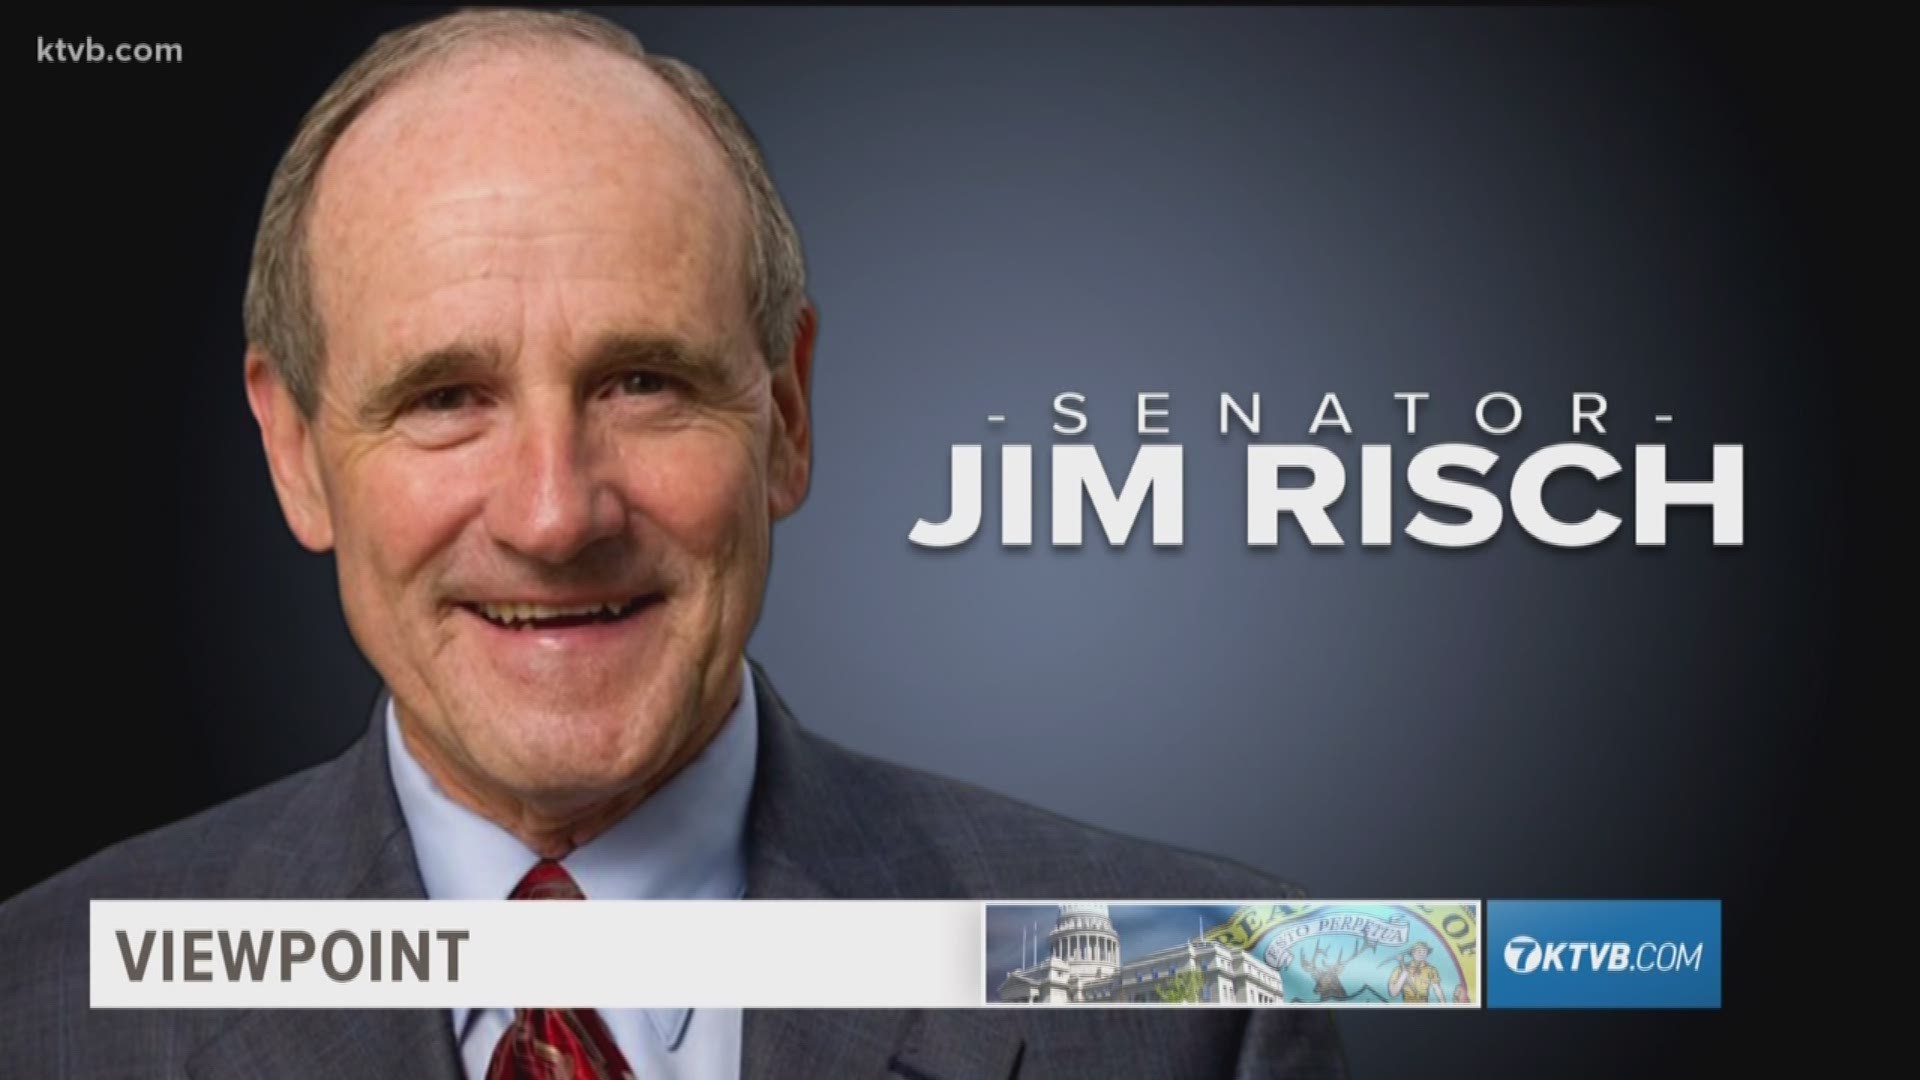 In this week's Viewpoint, Idaho Republican Senator Jim Risch, the new chairman of the Senate Foreign Relations Committee explains his reasoning for voting no on a resolution to block President Trump's national emergency declaration over funding for the border wall with Mexico. Sen. Risch also gives his viewpoint on the investigations swirling around the president, the testimony of the president's former personal lawyer Michael Cohen, plus our relations with North Korea, China, and Russia.